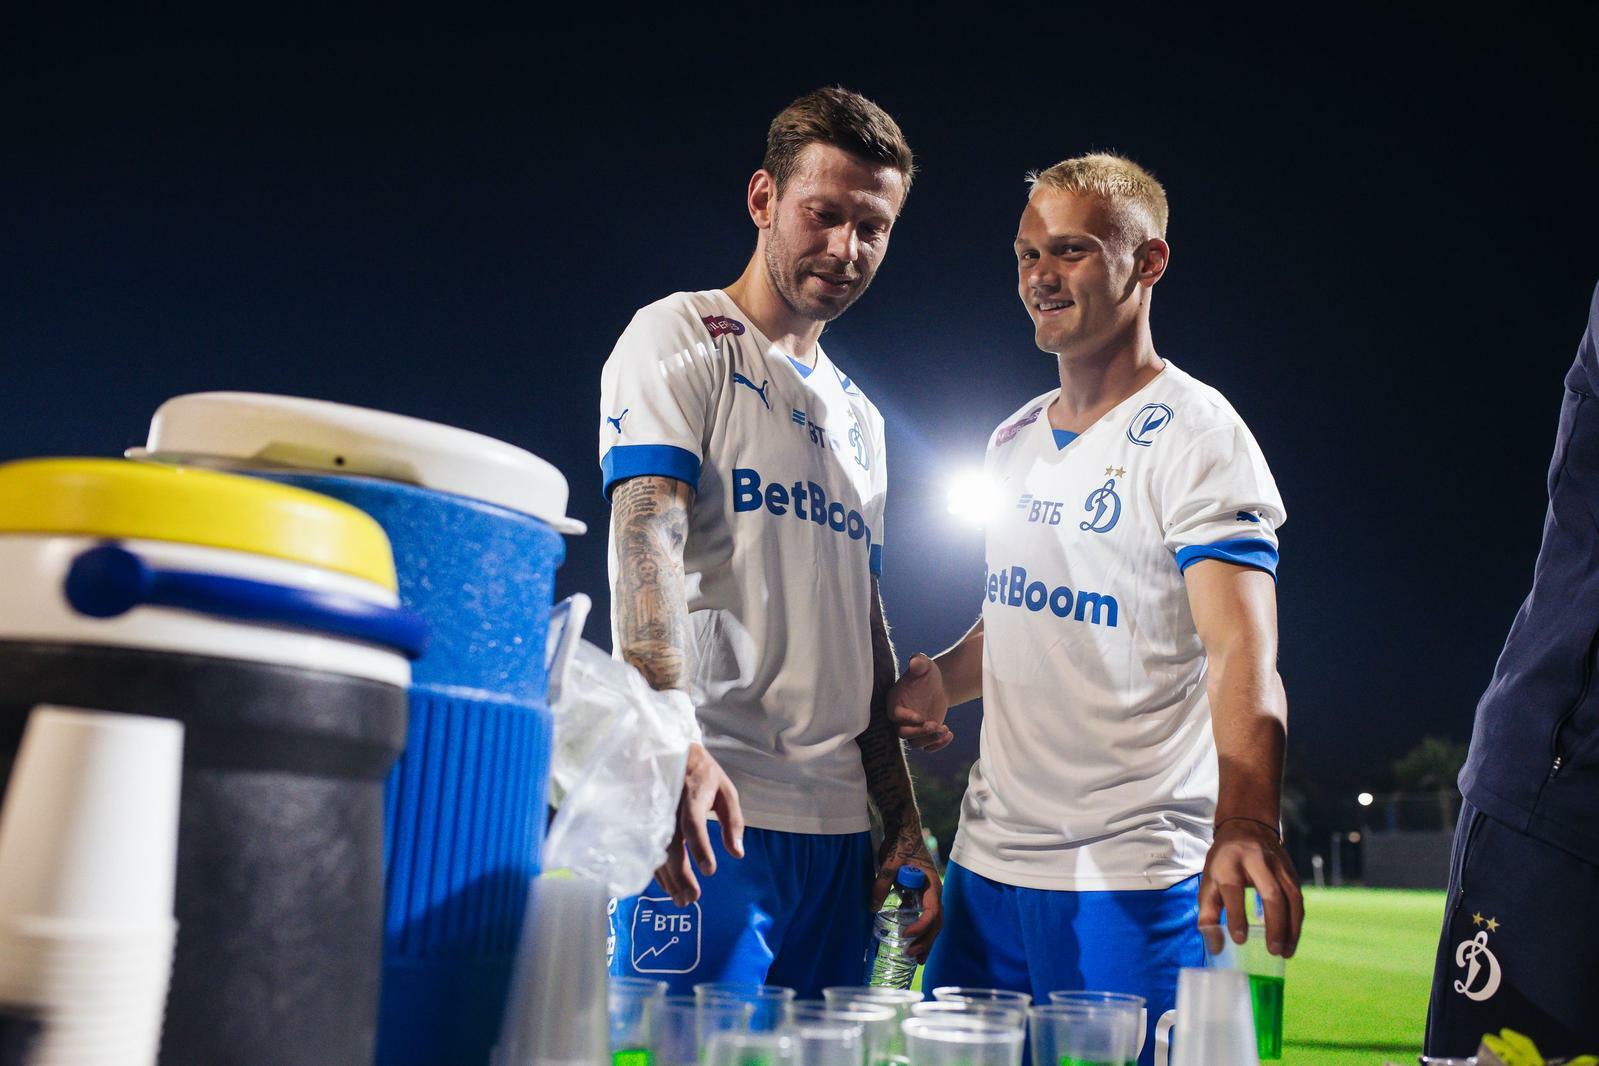 FC Dynamo Moscow News | Fedor Smolov: "It's great to see familiar faces of fans at the training camps, a cool tradition." Official Dynamo Club website.